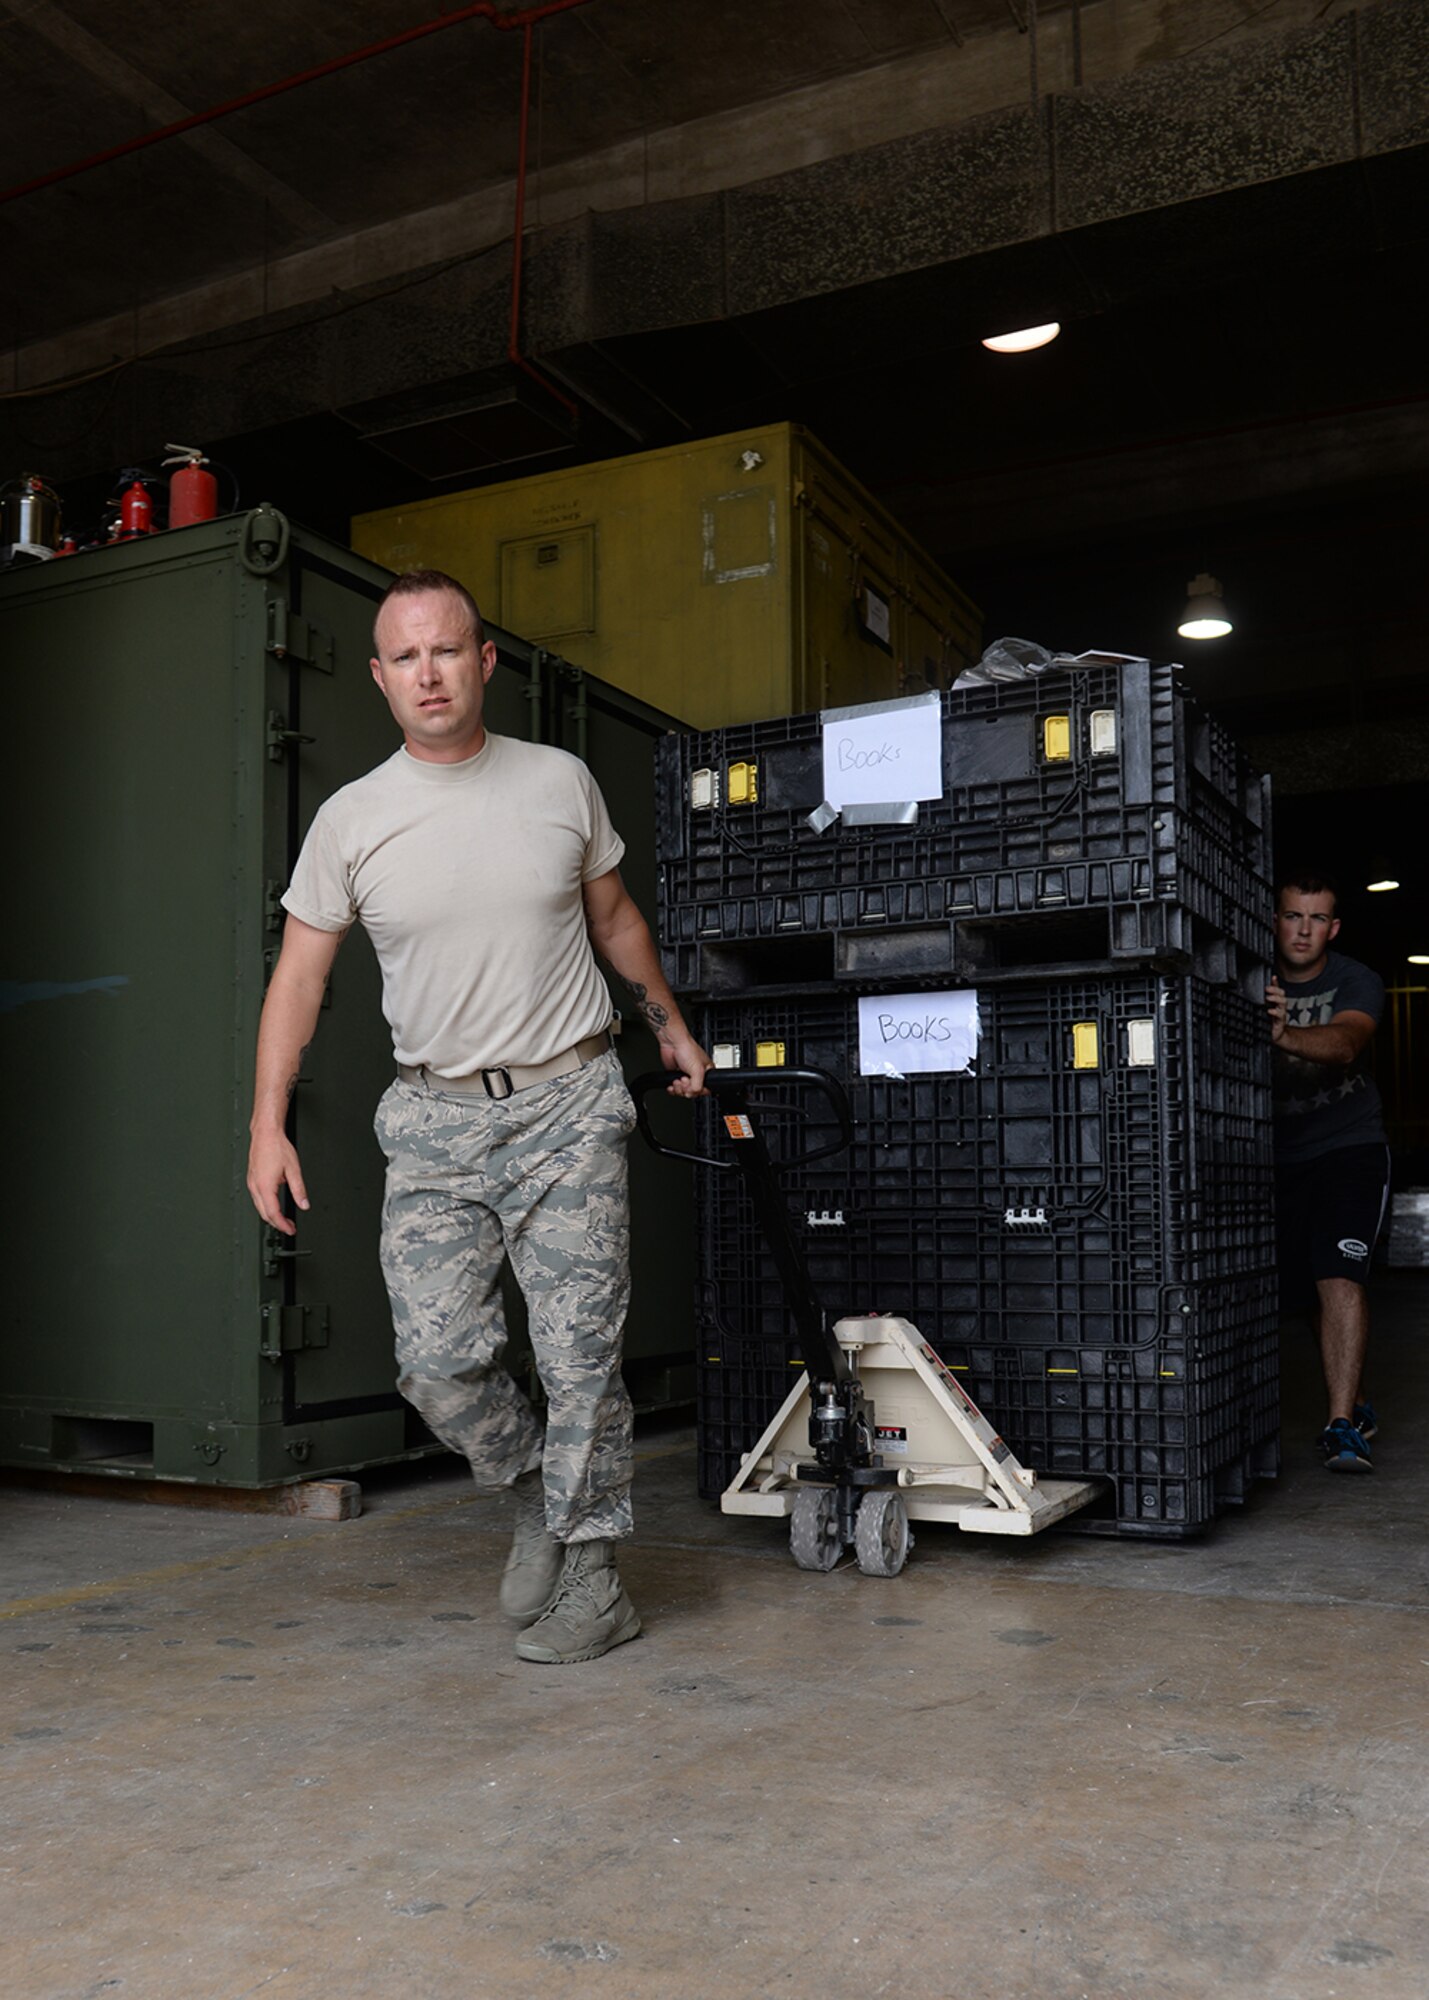 Master Sgt. Jesse Schwarztrauber, Operation Christmas Drop volunteer, moves crates containing donated items   Dec. 3, 2014, at Andersen Air Force Base, Guam. Operation Christmas Drop is an annual humanitarian airlift mission that began in 1952 and supplies more than 50 islands with boxes that contain donations such as non-perishable food items, clothing, medical supplies, tools, toys and other various items. (U.S. Air Force photo by Senior Airman Katrina M. Brisbin/Released.) 